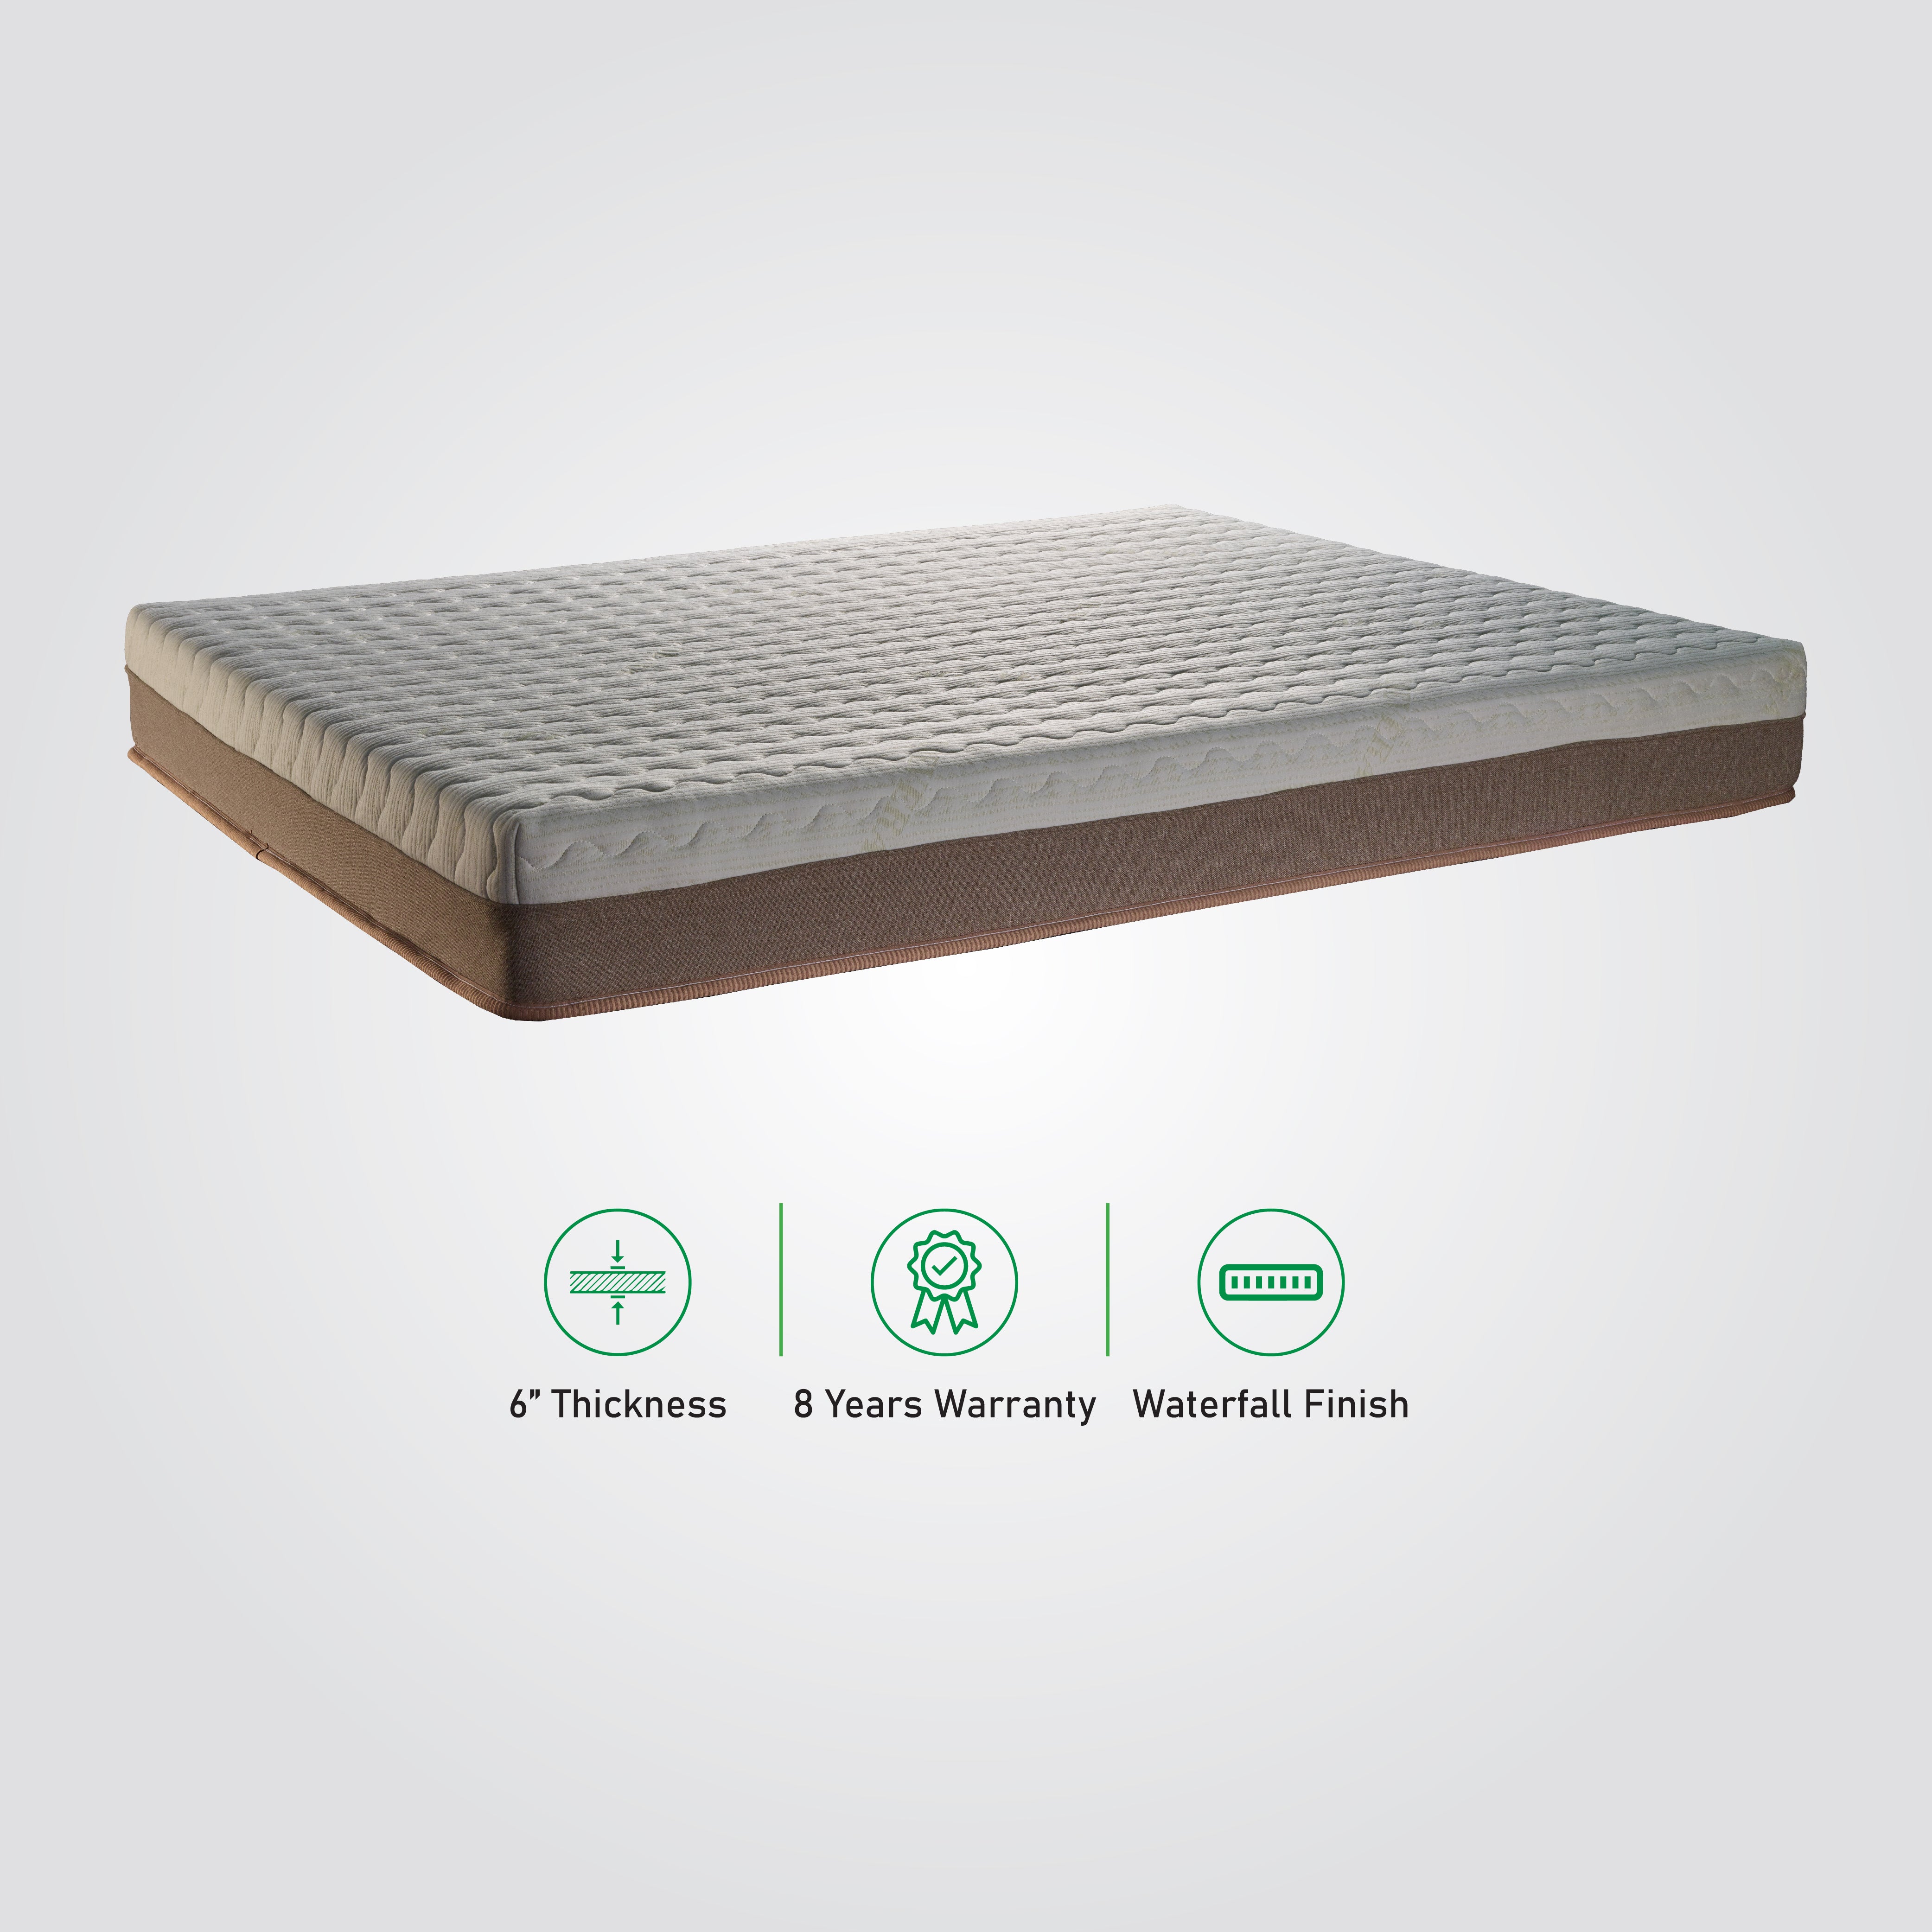 Best Hypoallergenic Rubberized Coir And Natural Latex Mattress In India